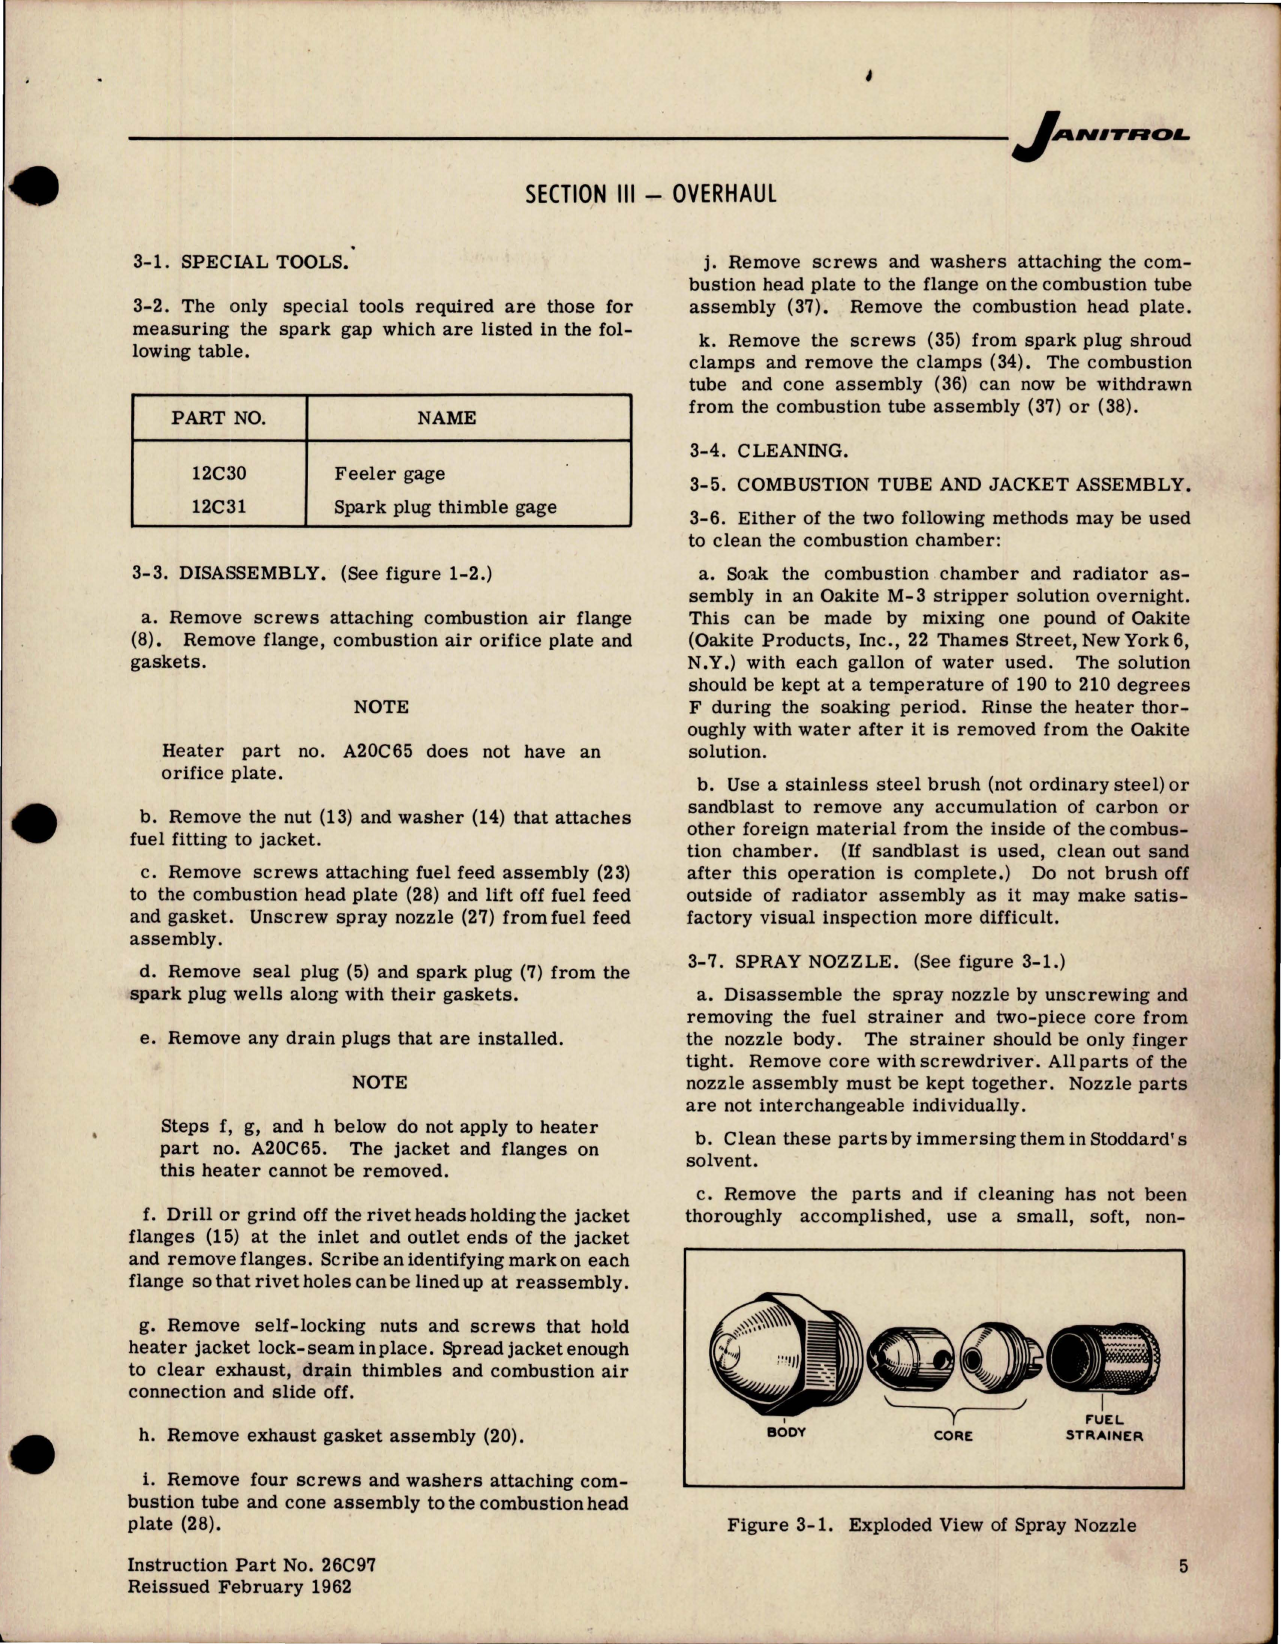 Sample page 5 from AirCorps Library document: Maintenance Instructions for Aircraft Heaters S-200 Series - Parts 20C65, A20C65 and B20C65 